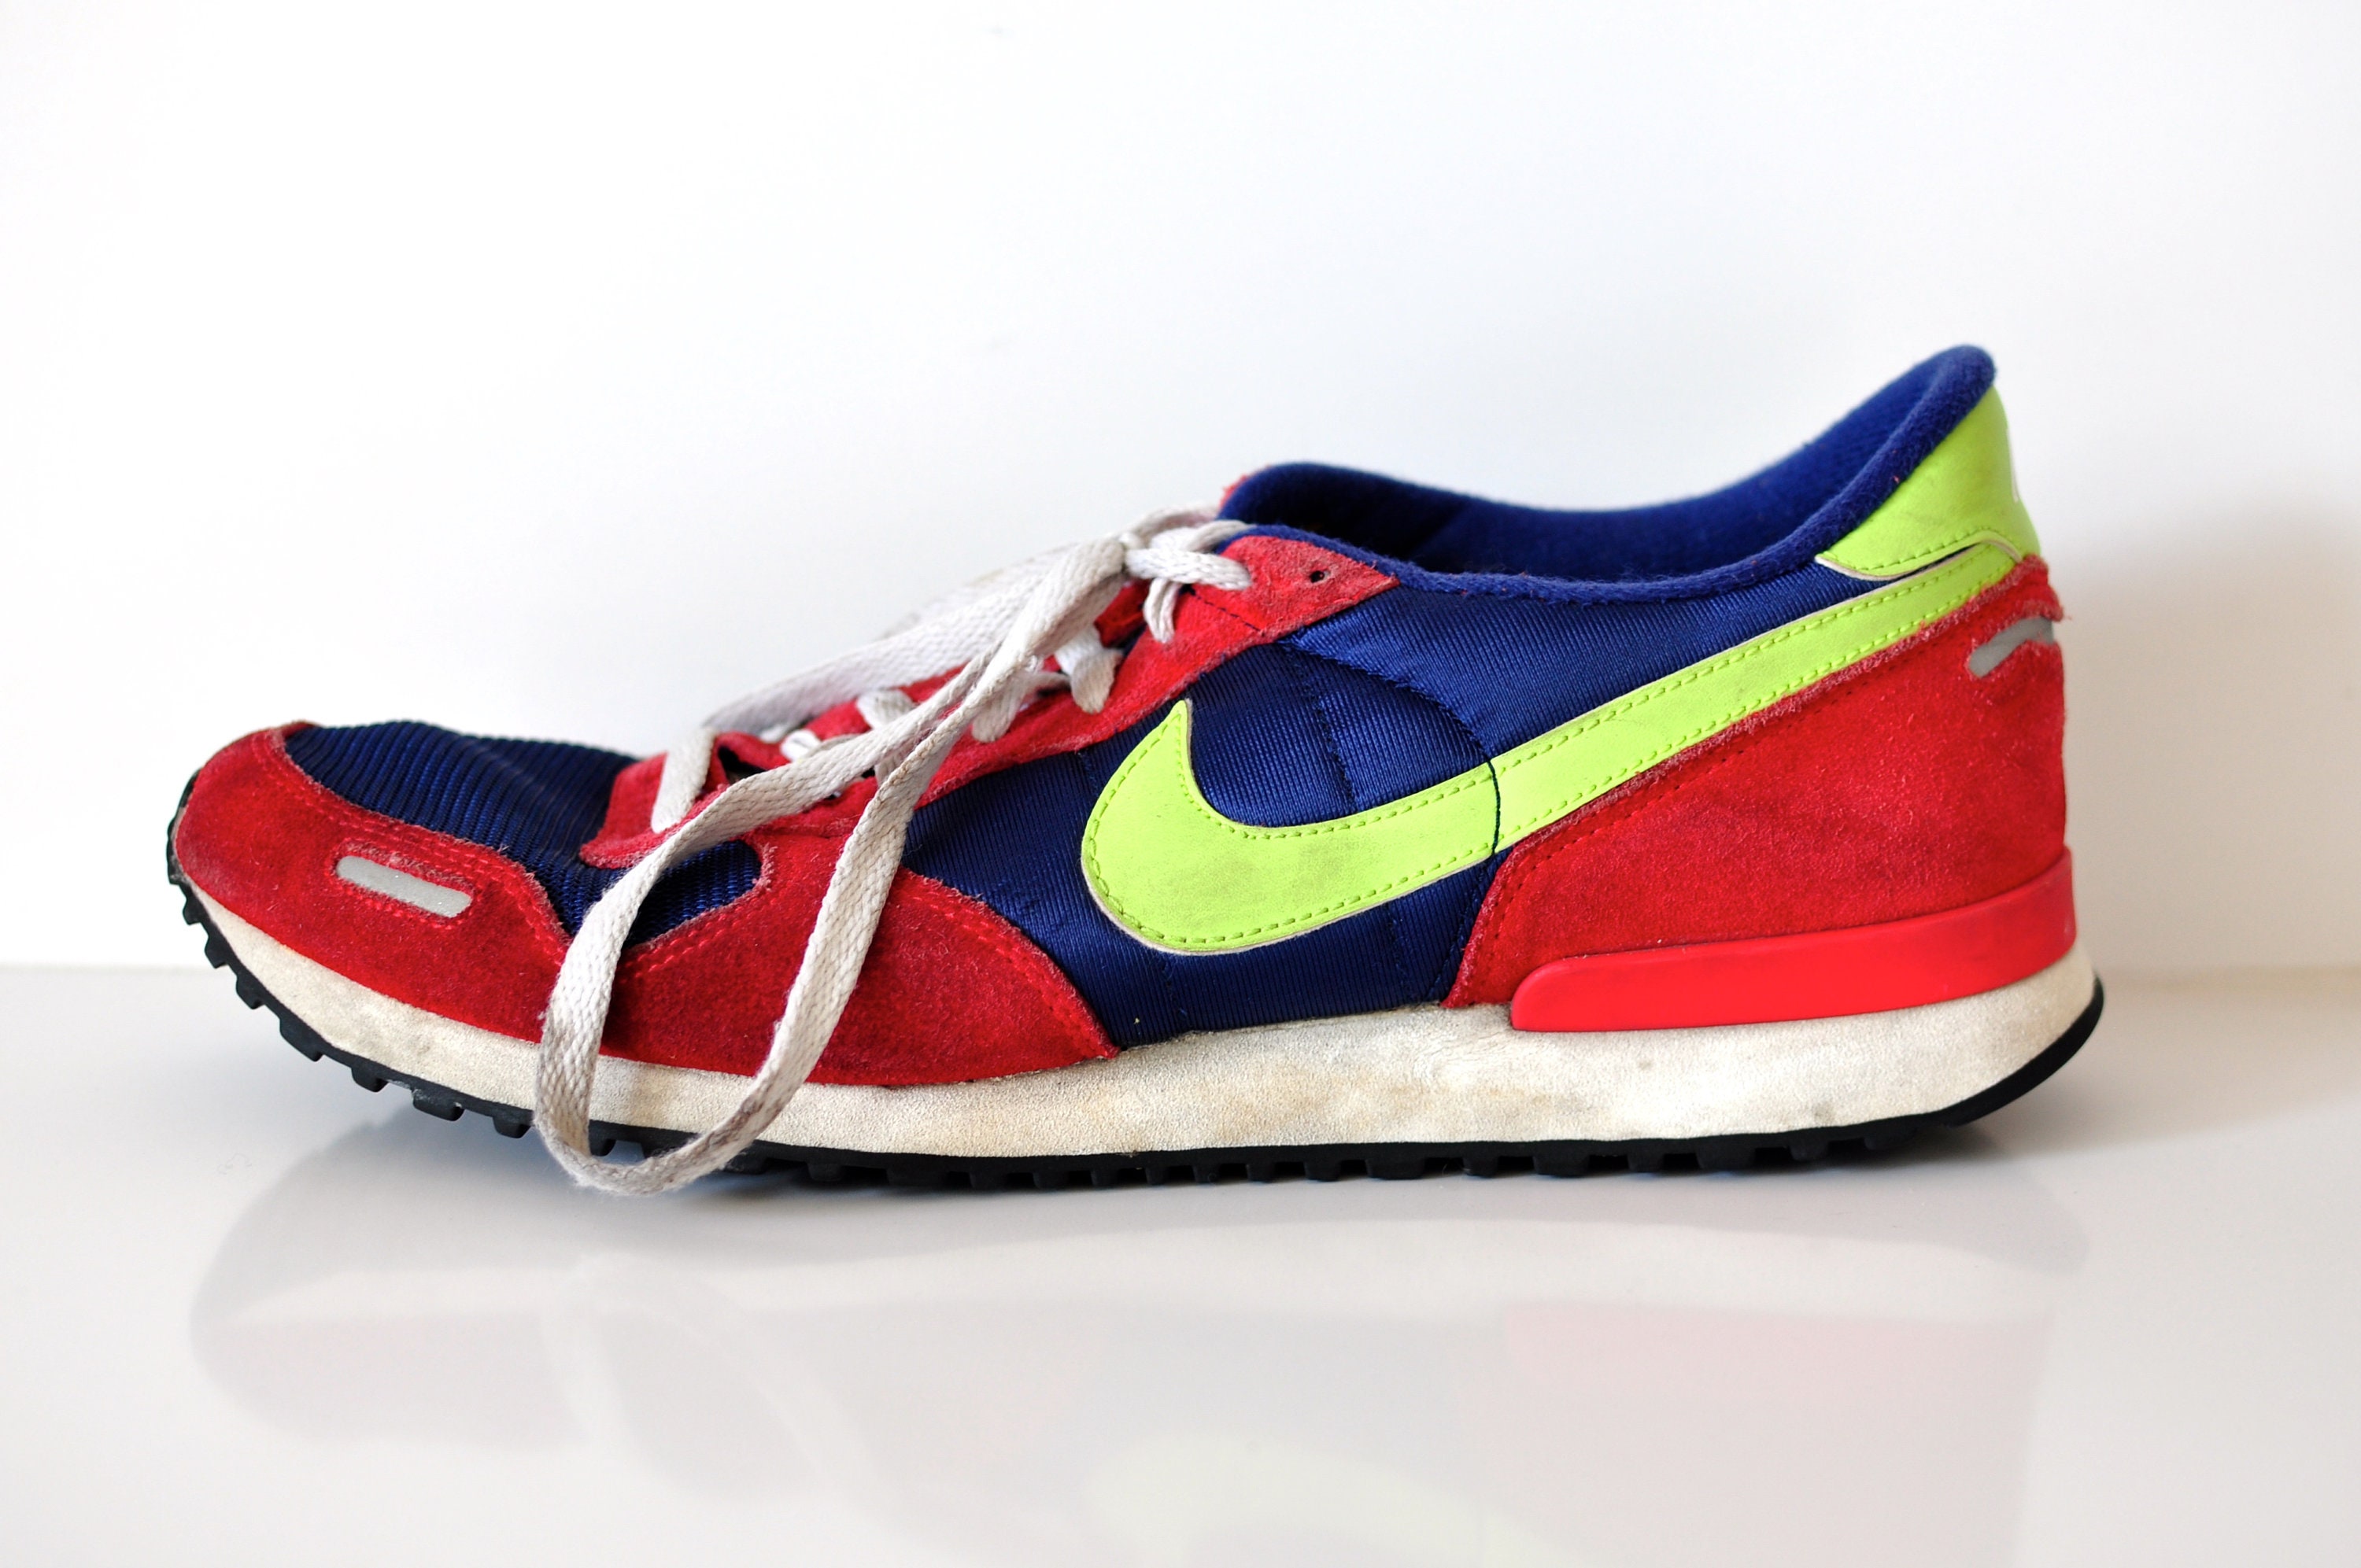 Nike Sneakers From the V-series Vintage Shoes - Etsy